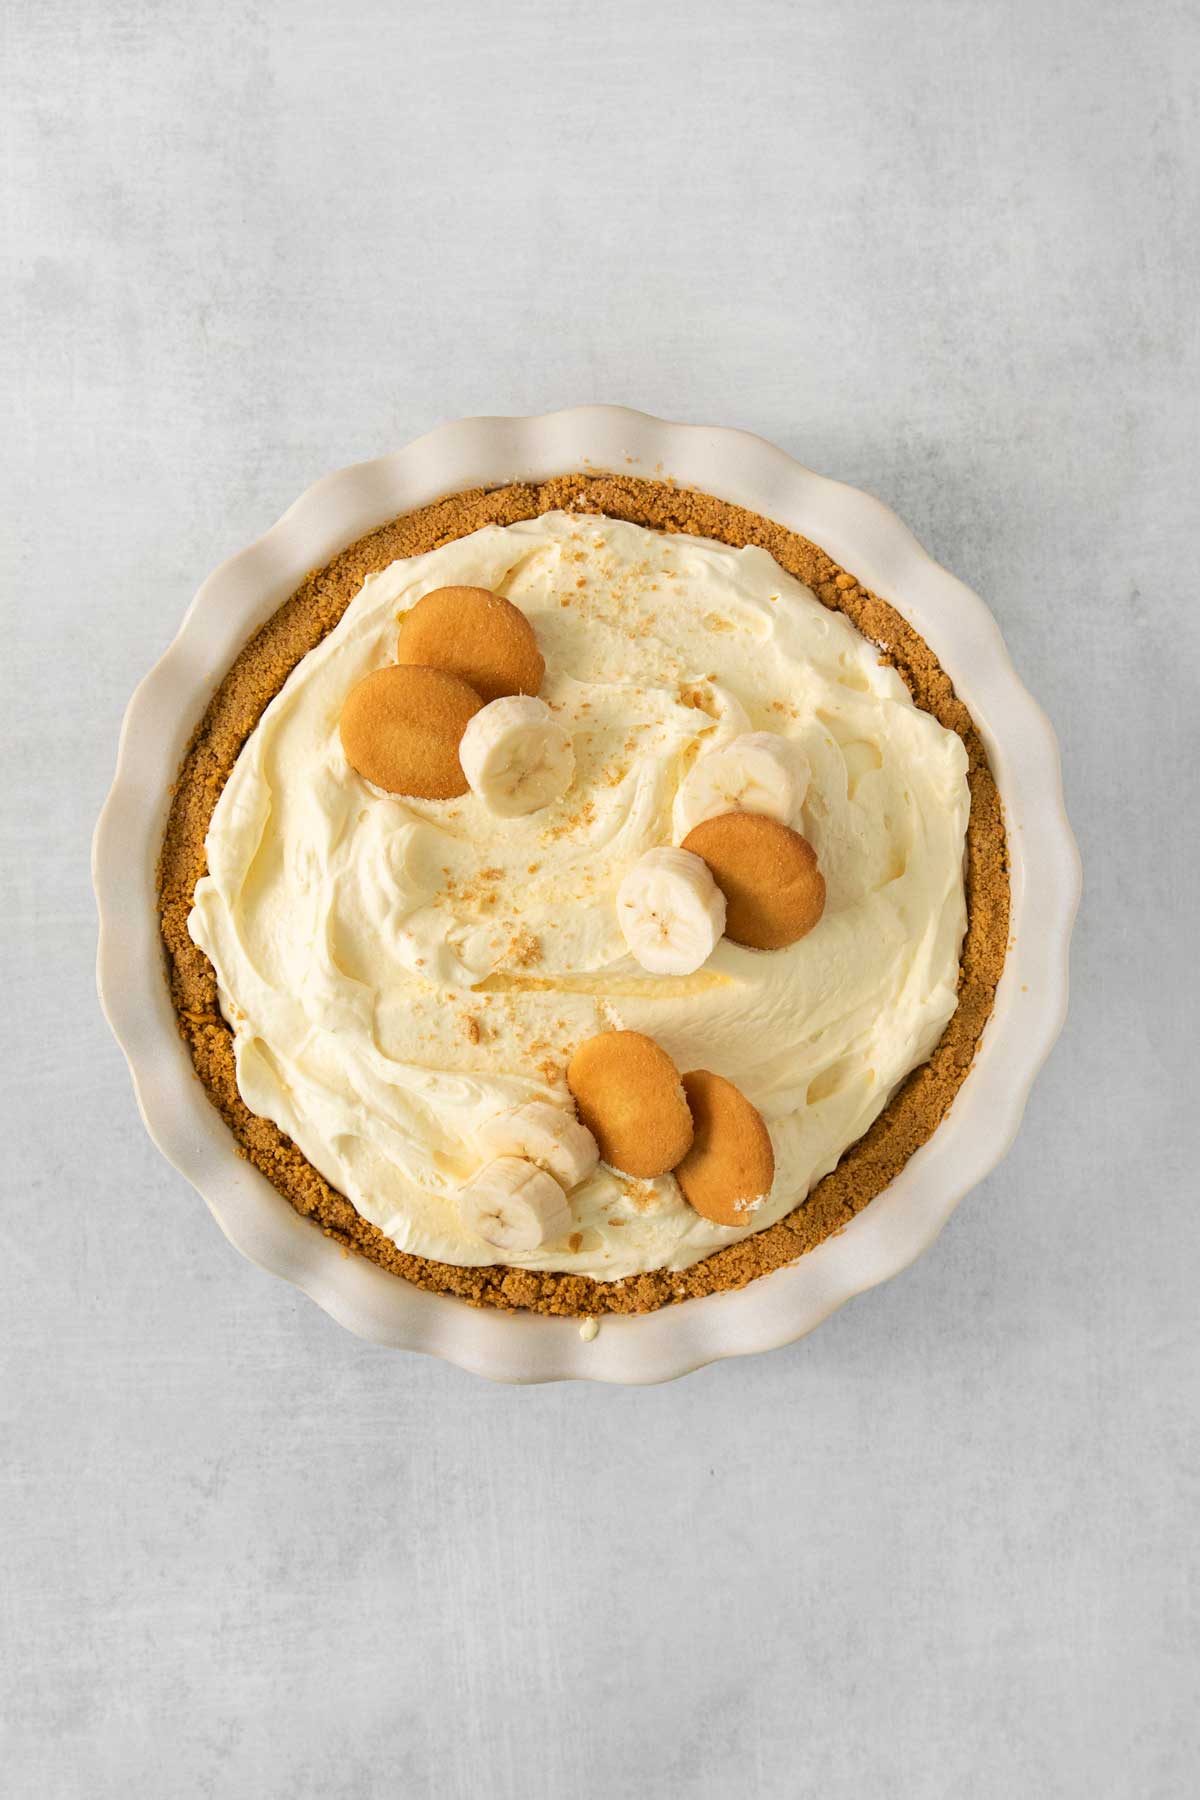 Another version of Banana Pudding Pie with different garnish